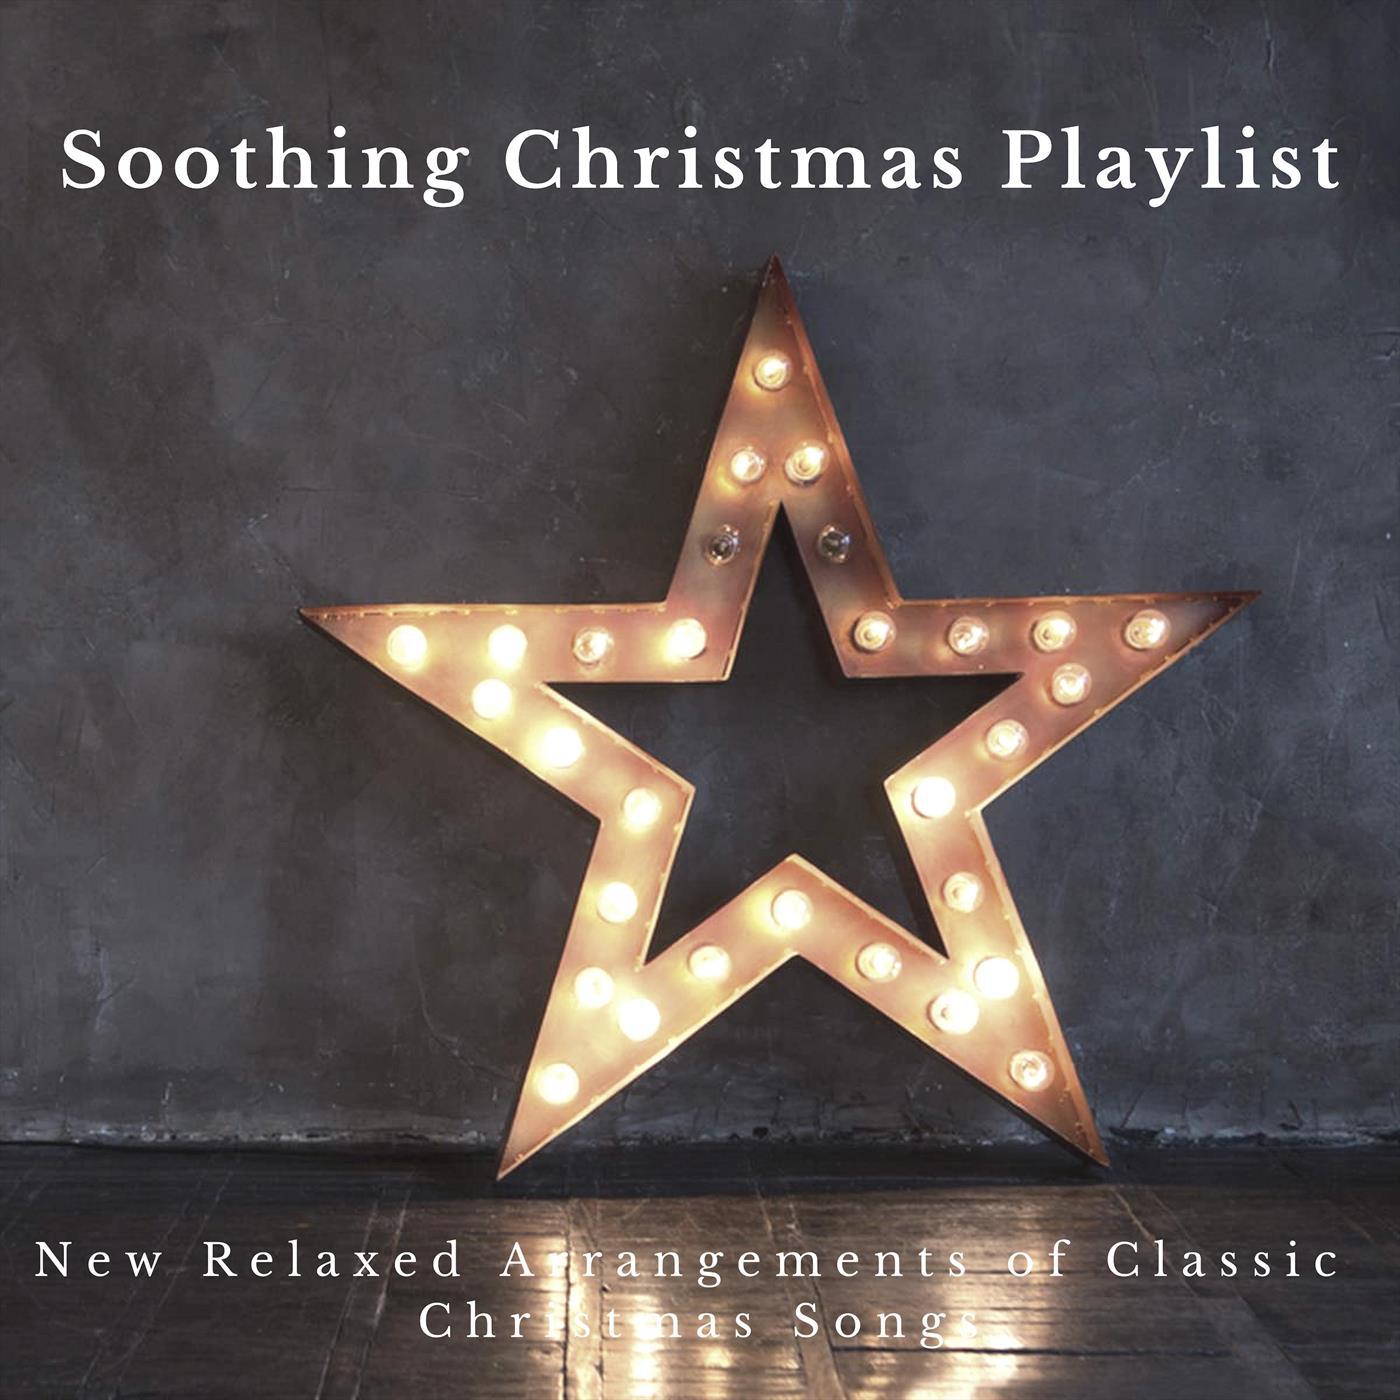 Soothing Christmas Playlist: New Relaxed Arrangements of Classic Christmas Songs